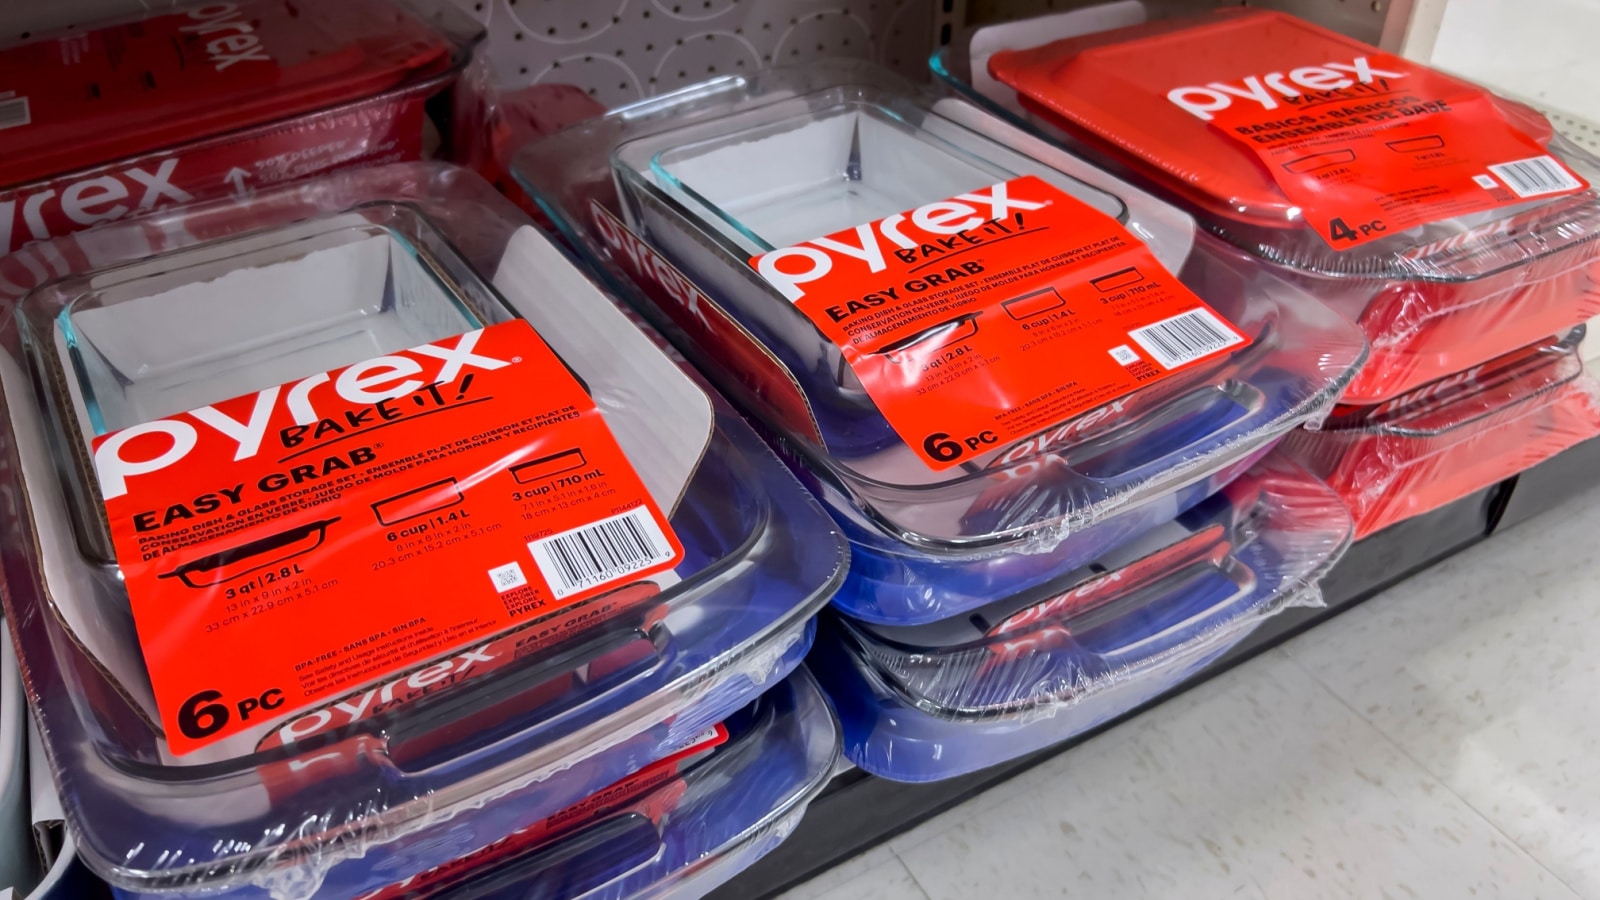 Seattle, WA USA - circa August 2022: Close up, selective focus on Pyrex products for sale inside a Target retail store